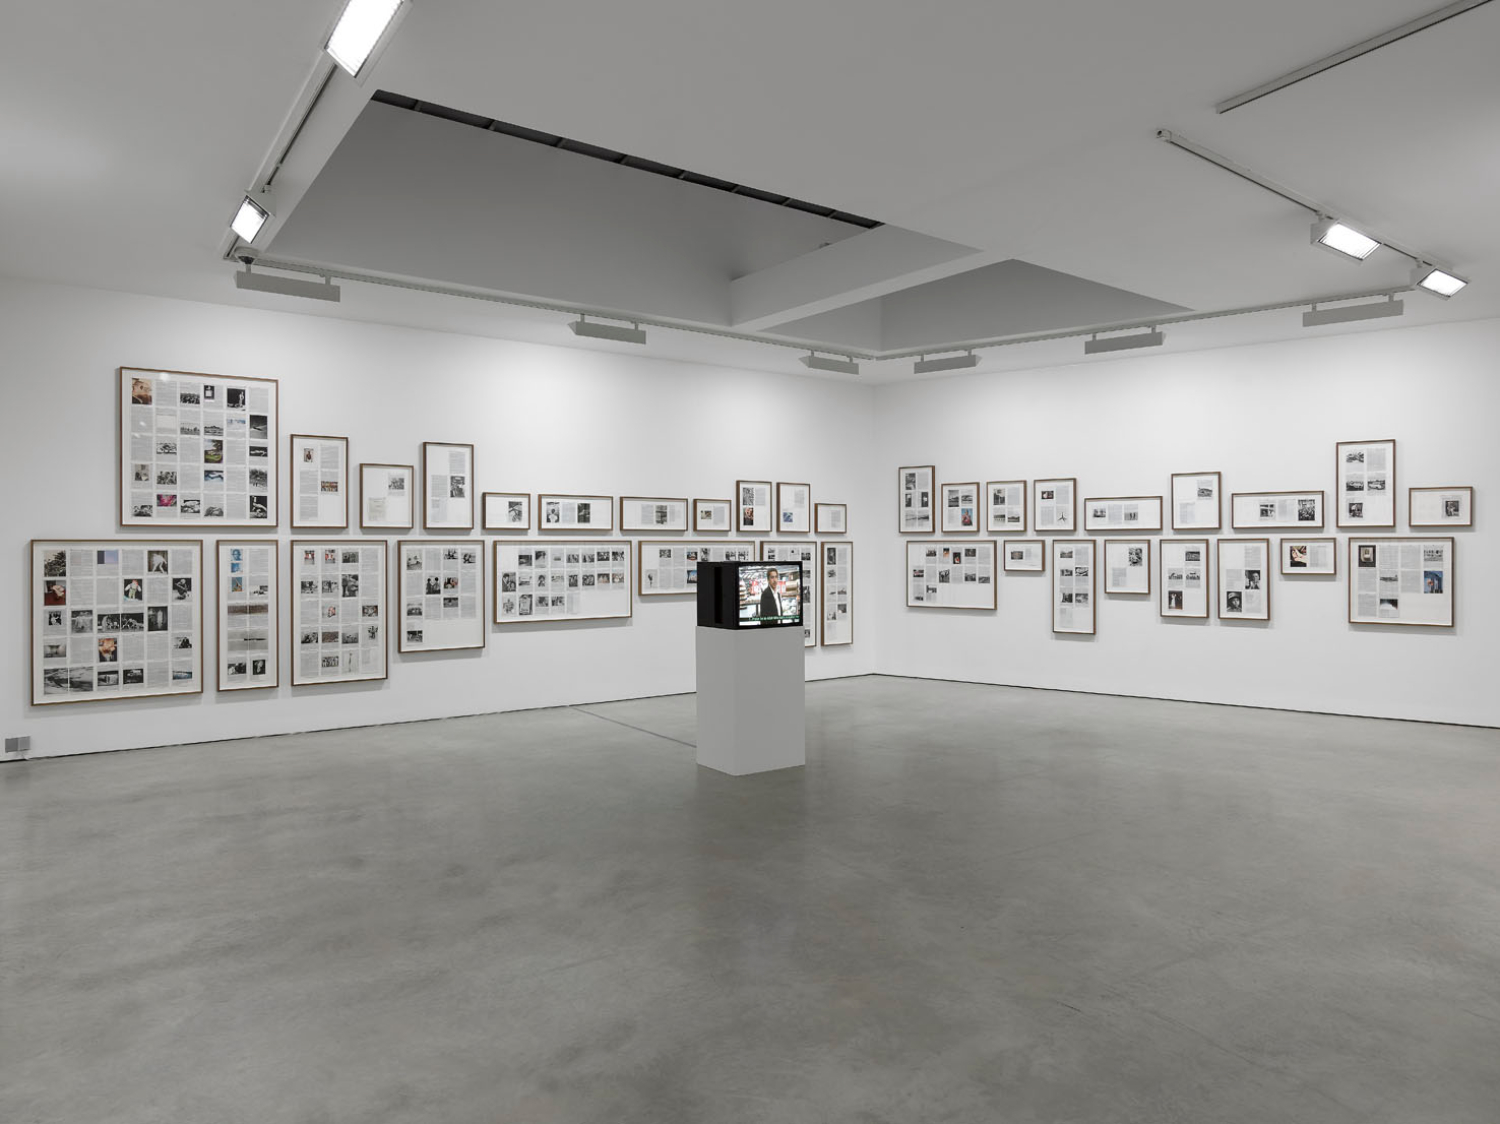  Cross Section of a Revolution, Lisson Gallery, London, Installation View, 2015, Image © Lisson Gallery, London 